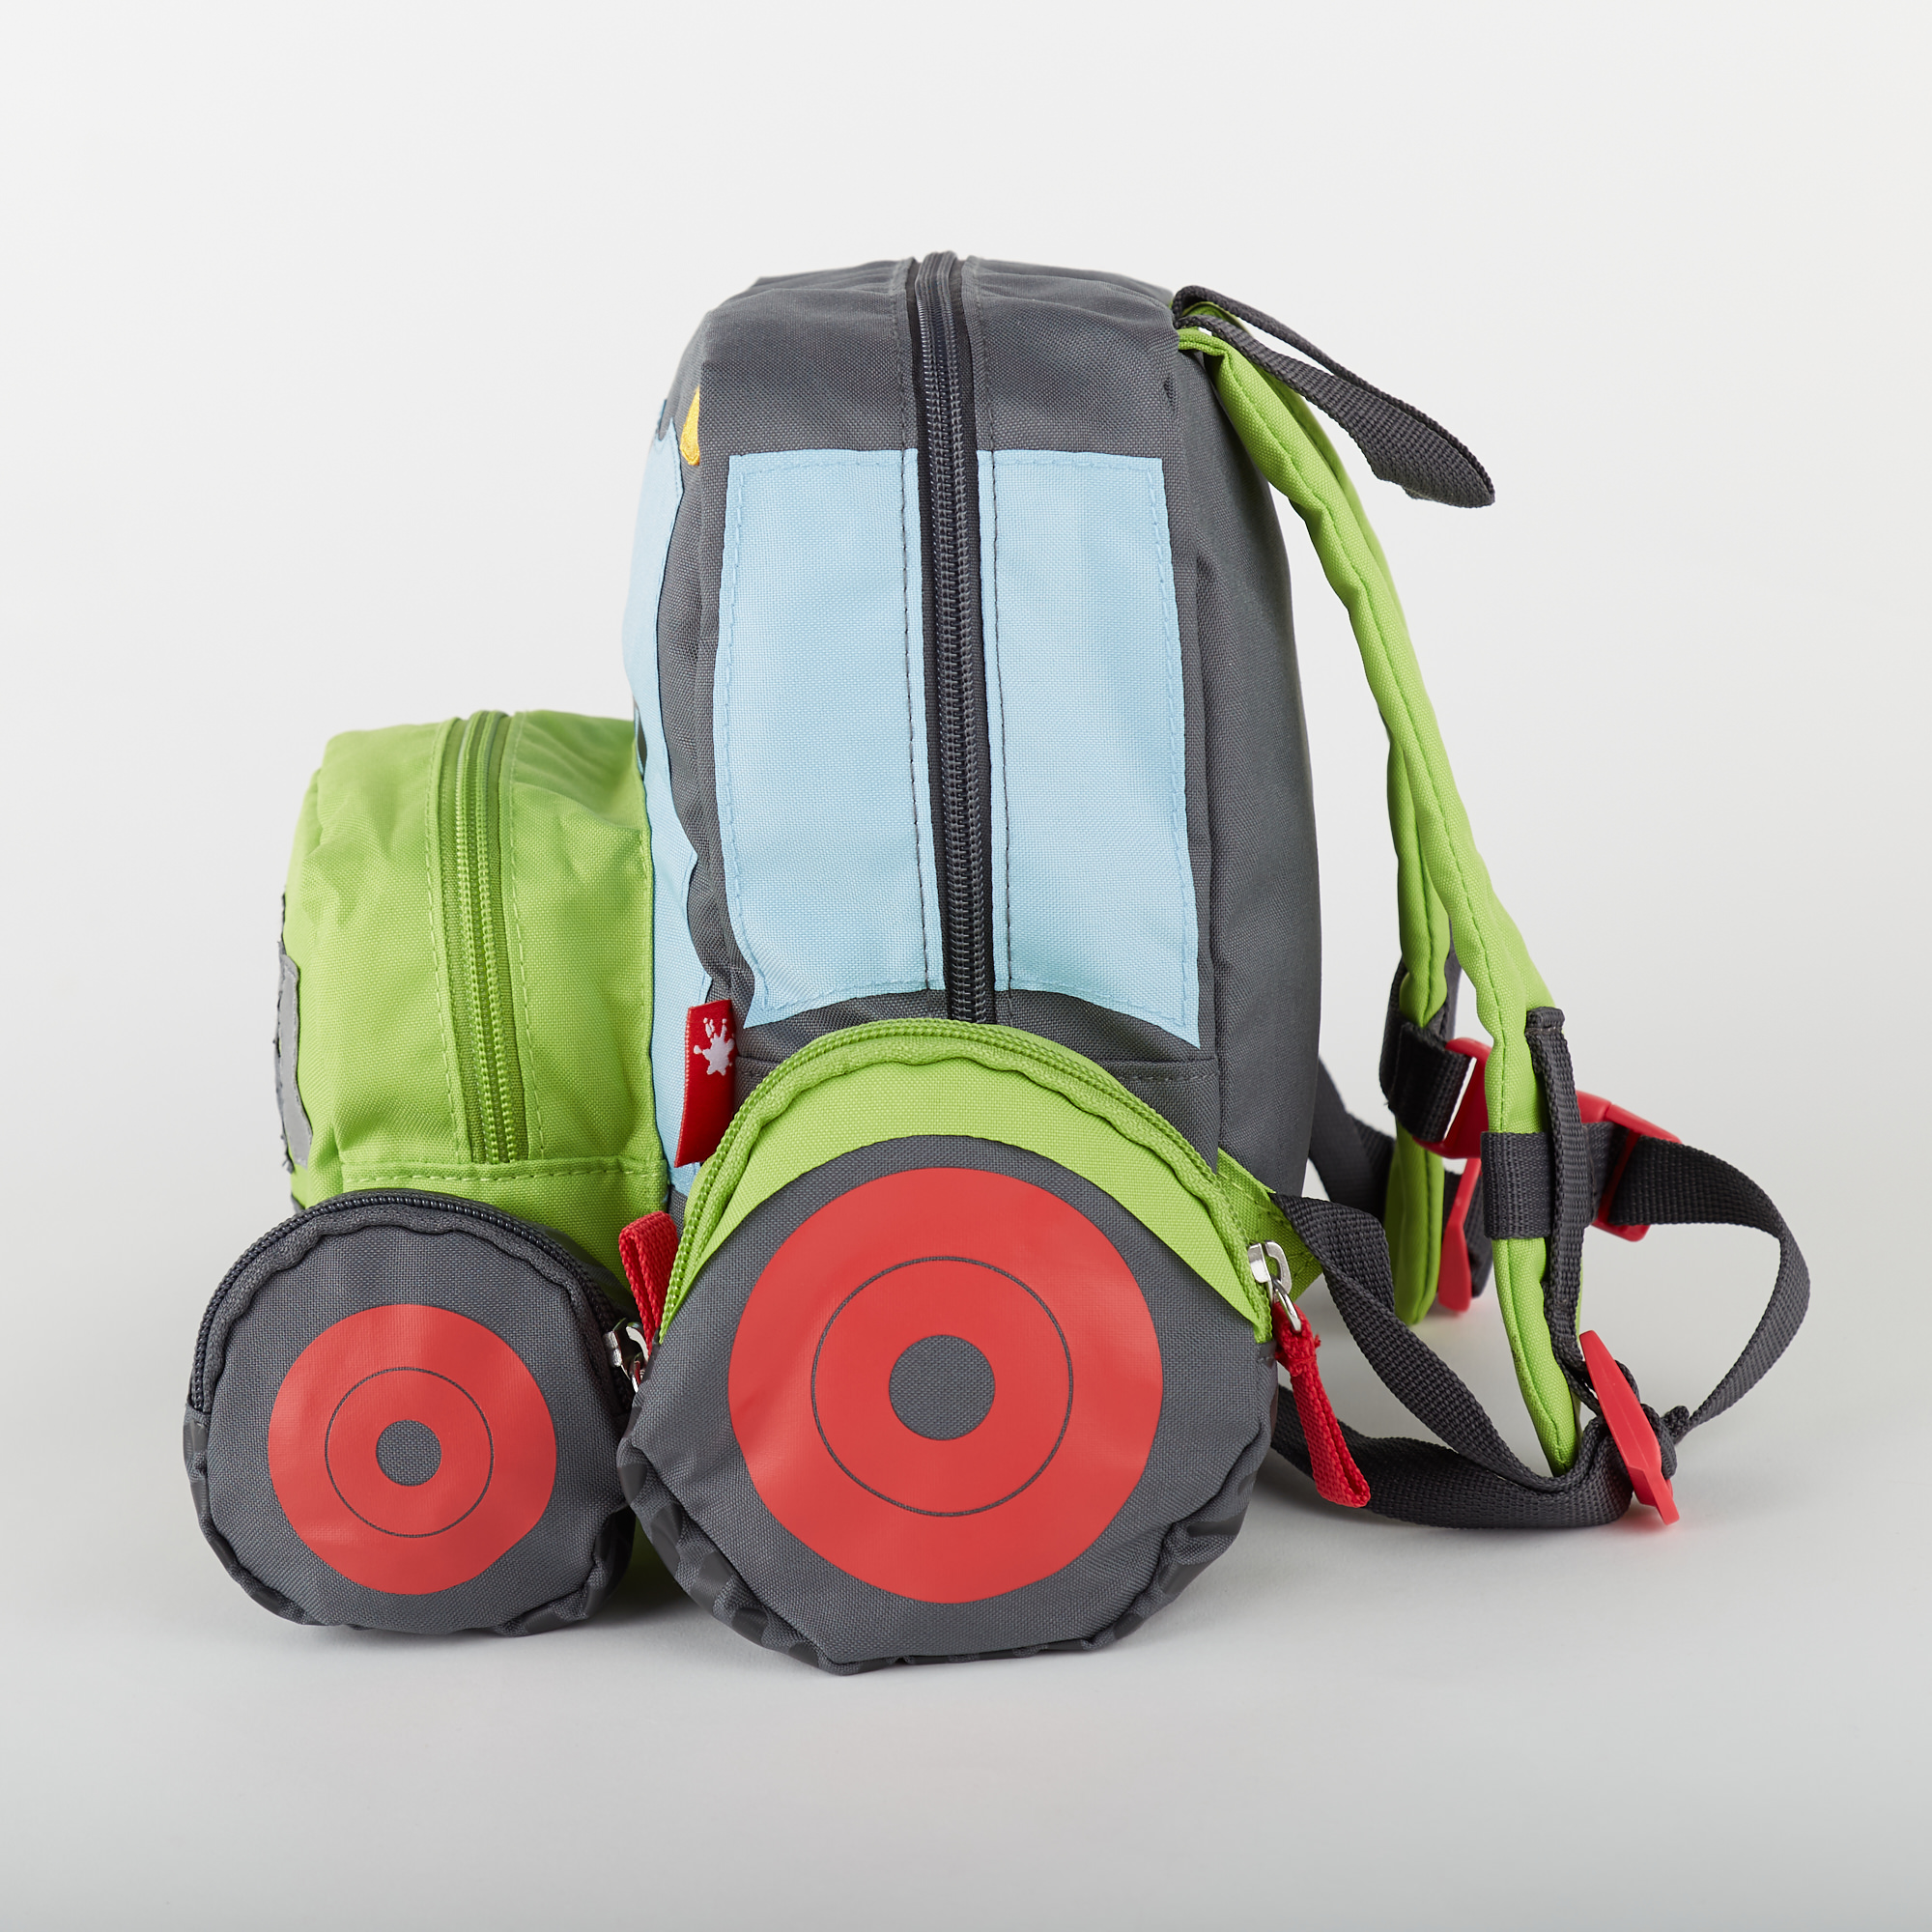 Boys' tractor backpack for daycare